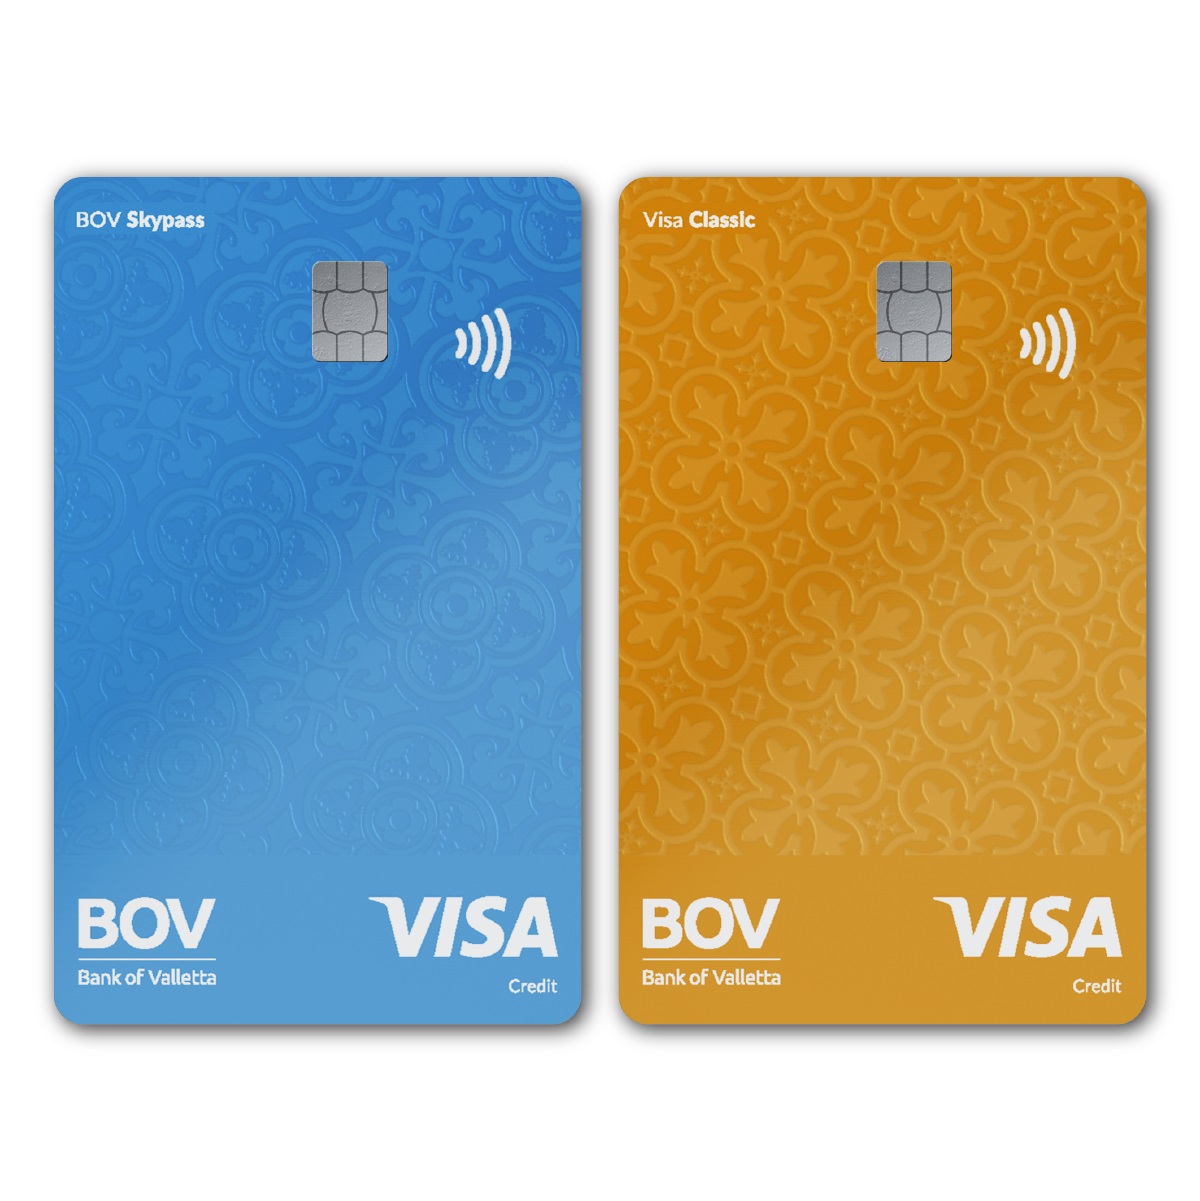 BOV Visa Cards not available in Russia